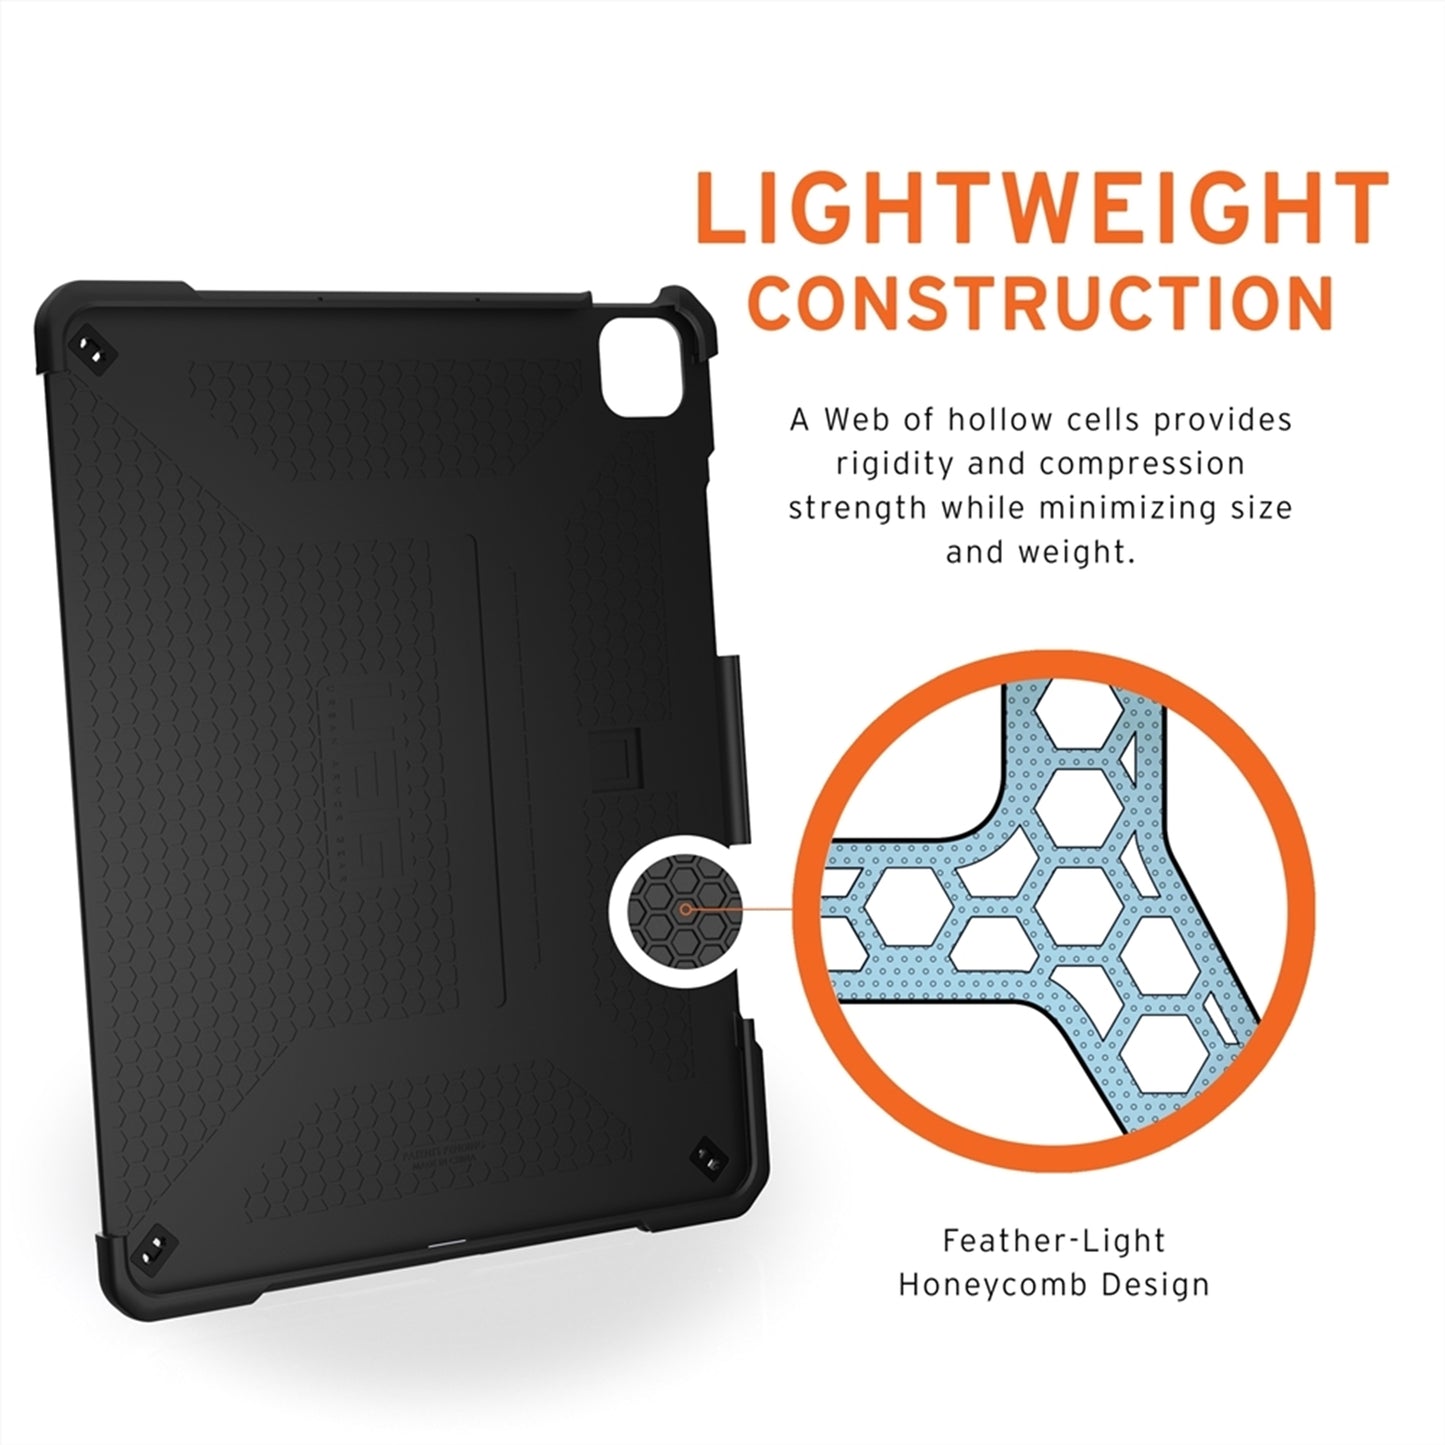 [RACKV2_CLEARANCE] UAG Metropolis for iPad Pro 12.9 ( 5th Gen - 2021 ) M1 Chip Case - Magma (Barcode : 810070360375 )